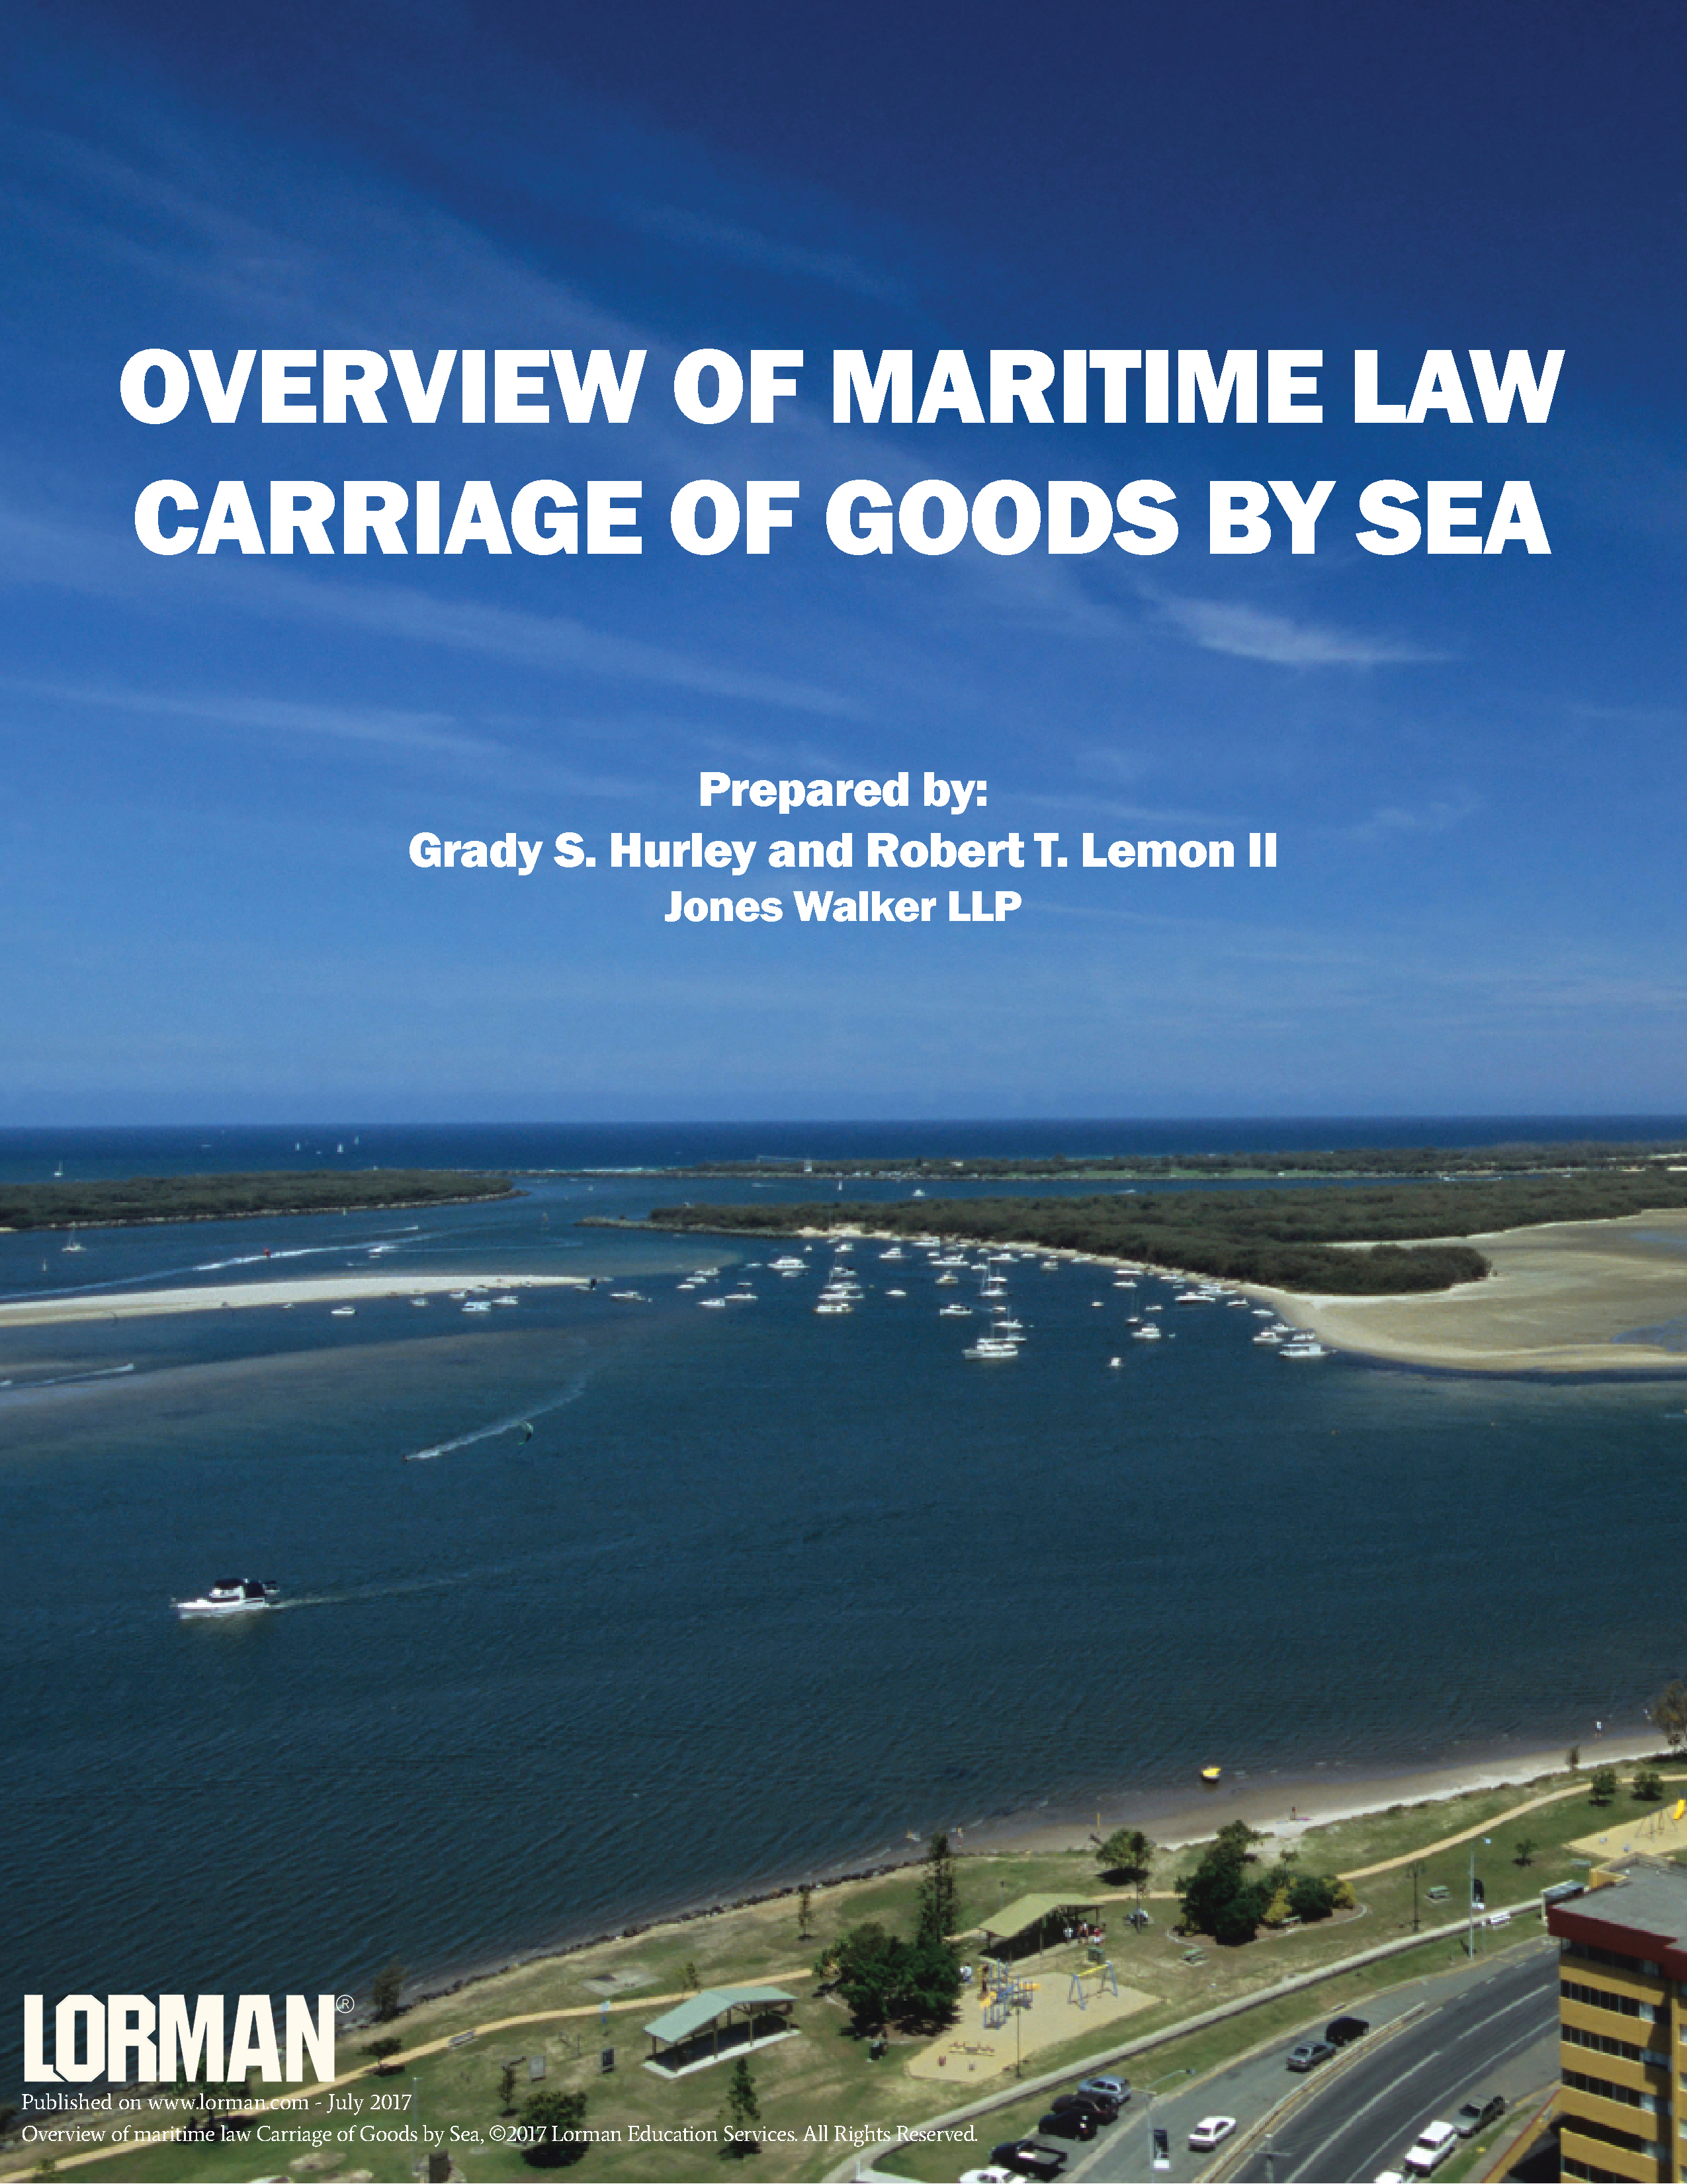 Overview of Maritime Law - Carriage of Goods by Sea